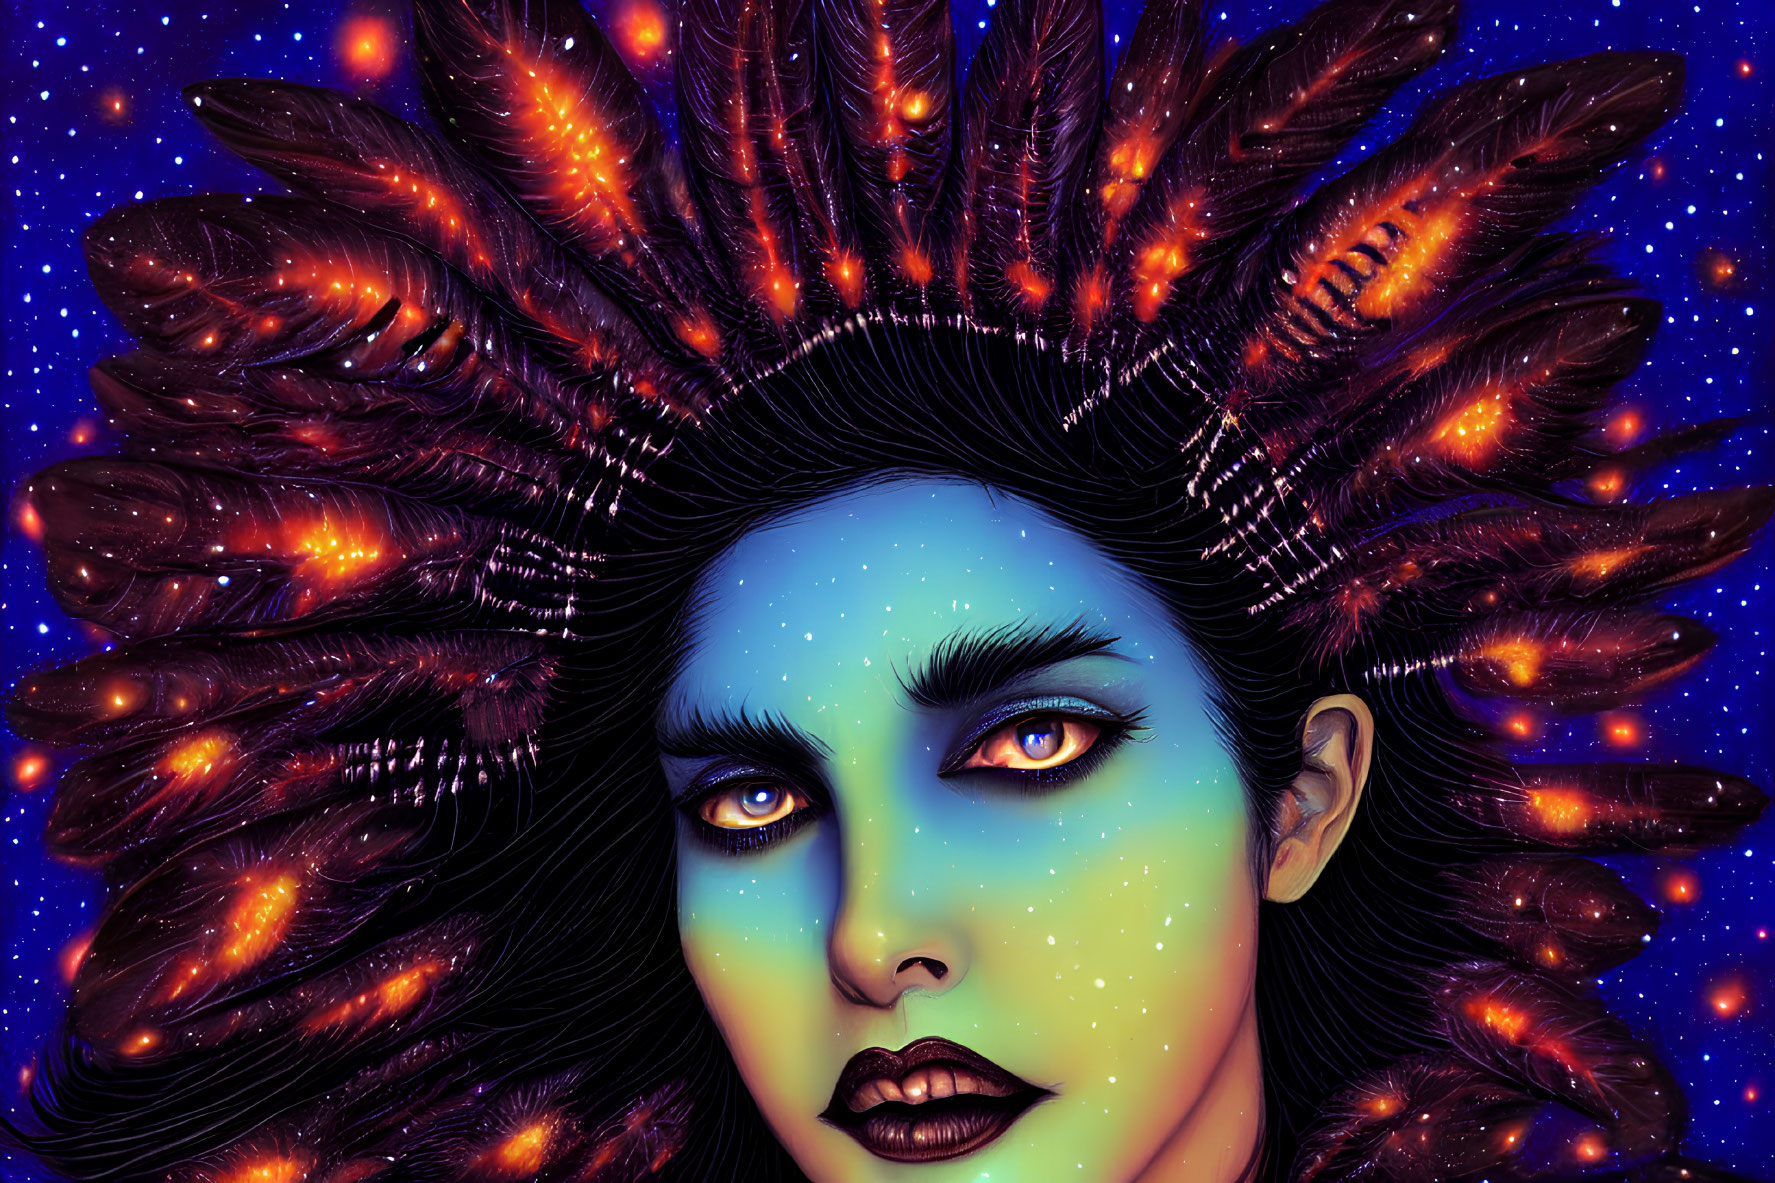 Woman with Radiant Crown in Cosmic Colors and Glowing Eyes